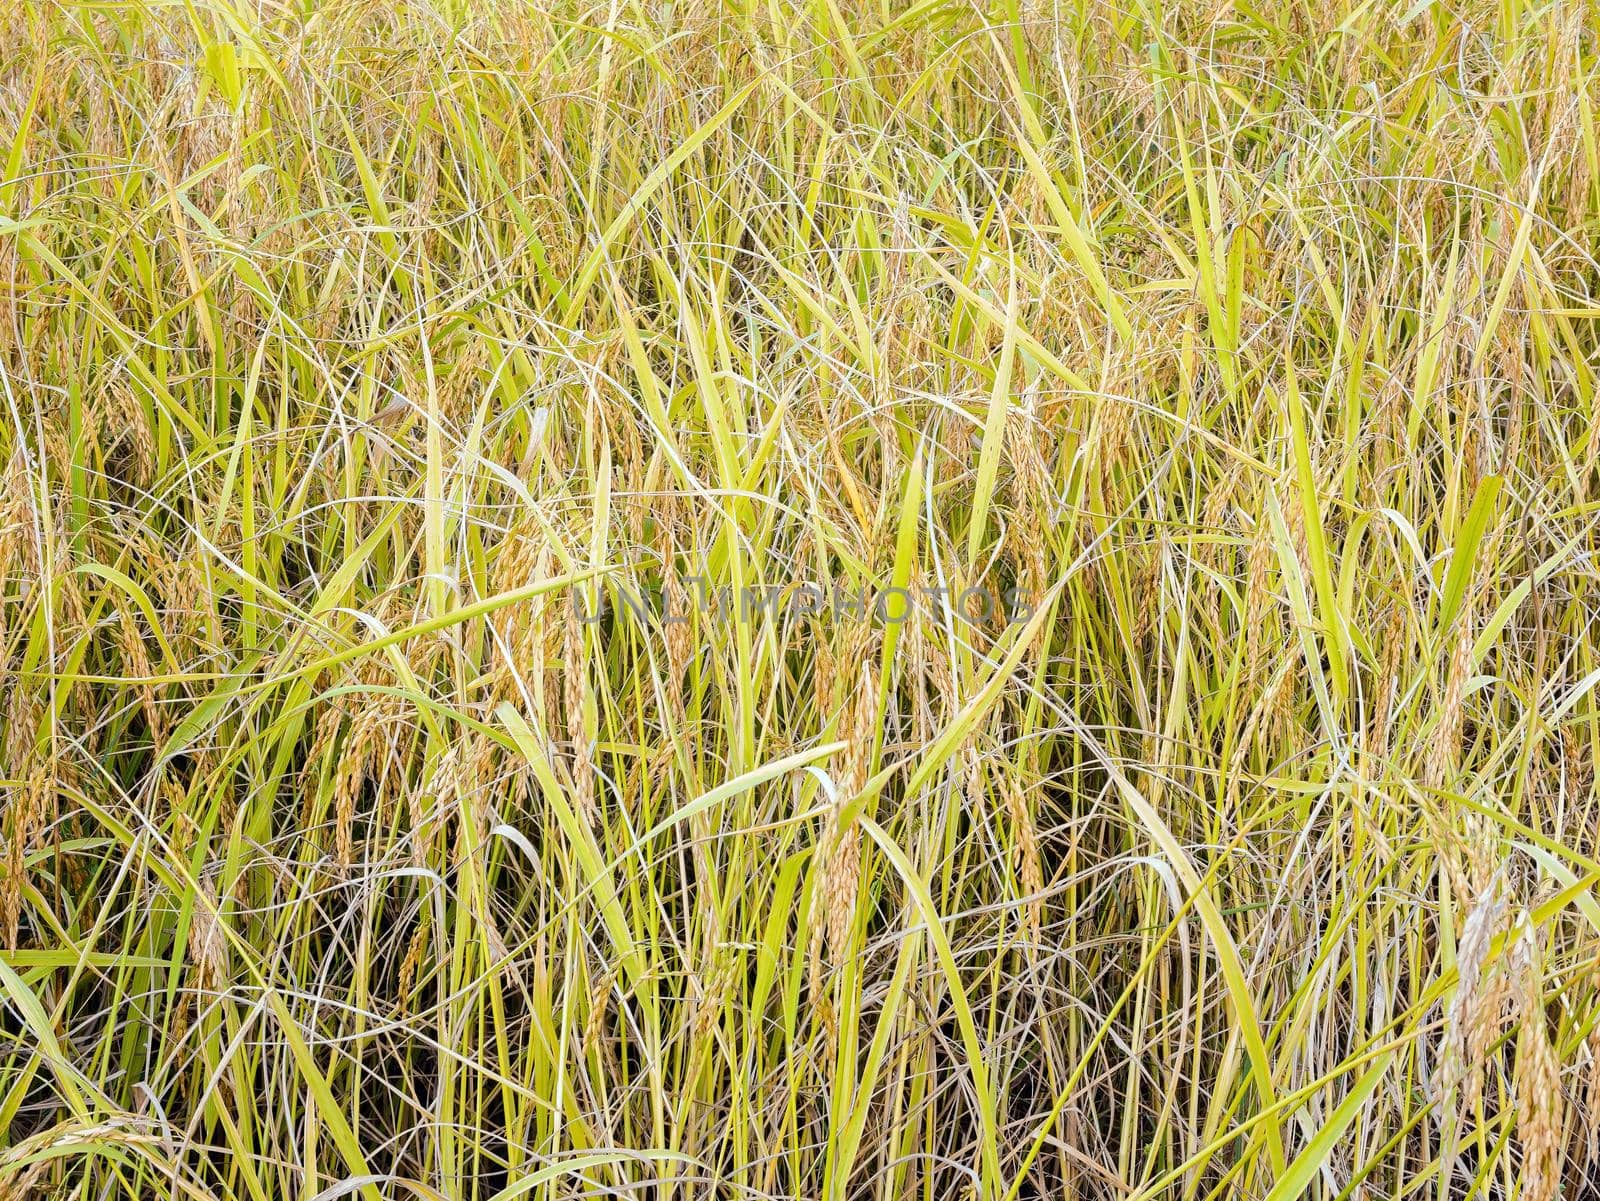 Golden yellow paddy in the fields ready for harvest